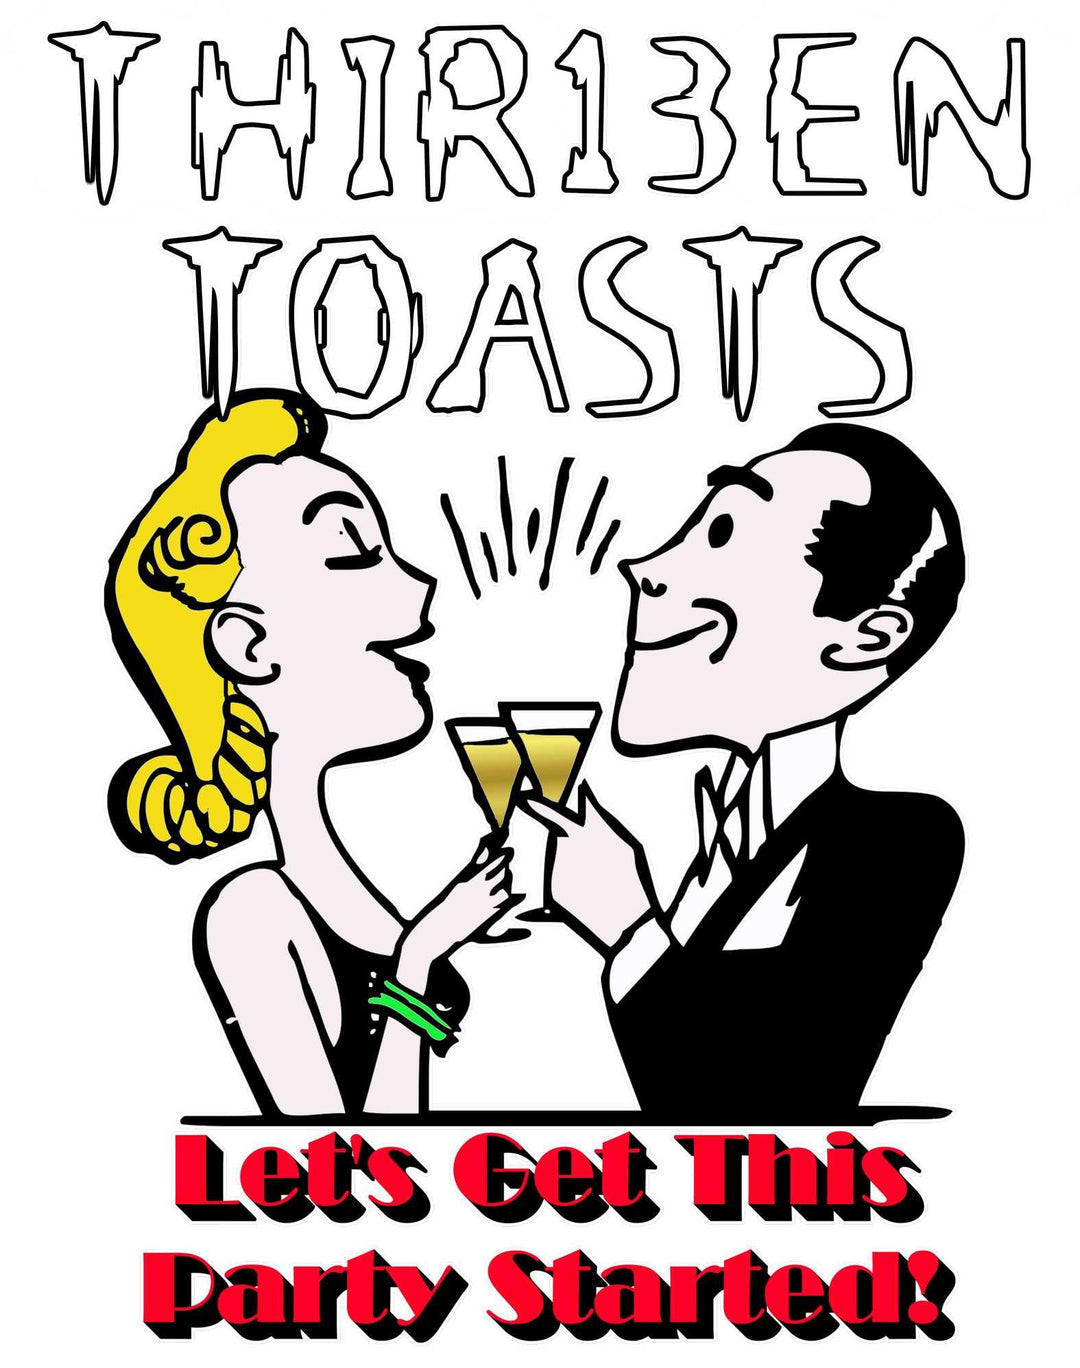 Thir13en Toasts Let's Get This Party Started! - Witty Twisters T-Shirts